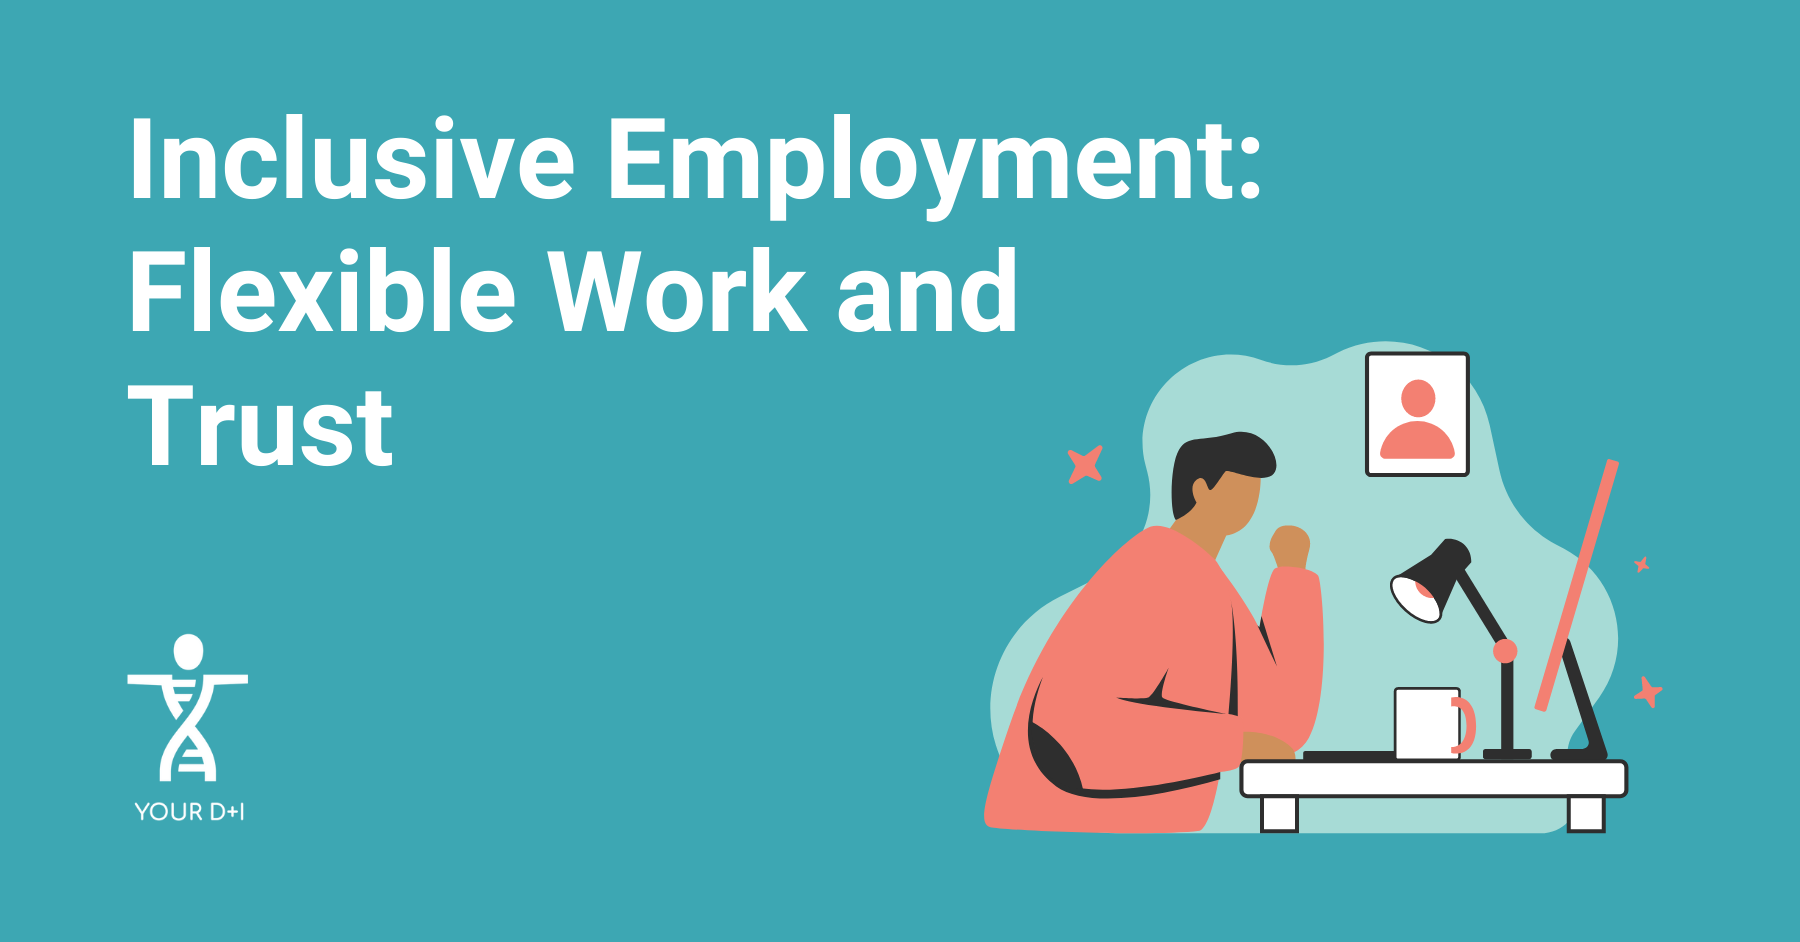 A title reads 'Inclusive Employment: Flexible Work and Trust' above an illustration of a person sitting in their home office.